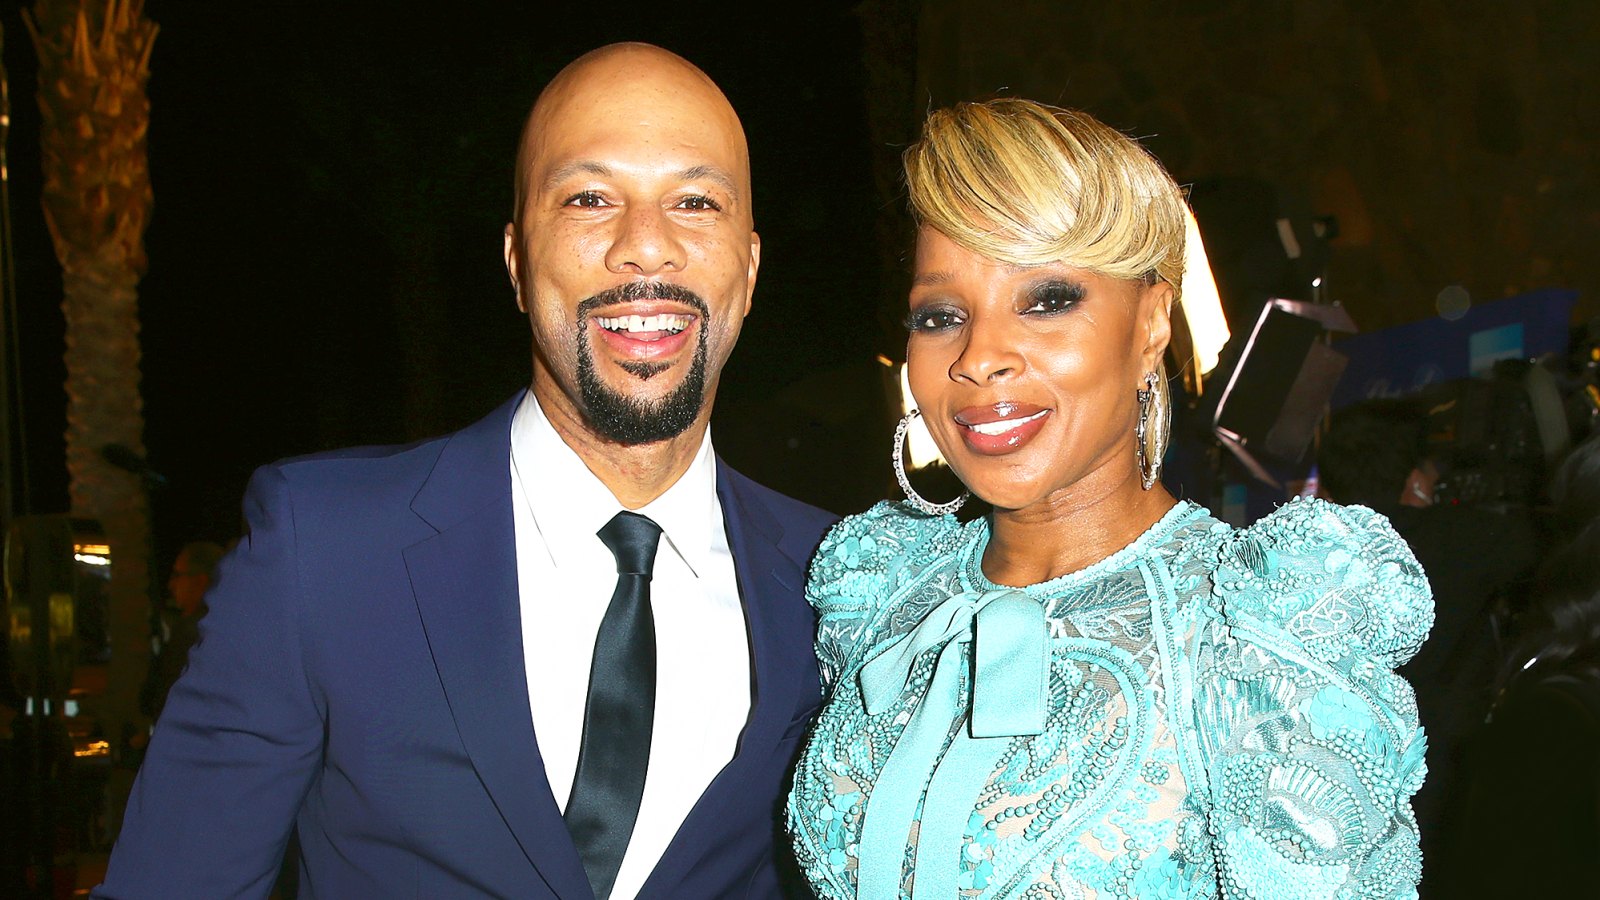 Common and Mary J. Blige attend the 29th Annual Palm Springs International Film Festival Awards Gala at Convention Center in Palm Springs, California.